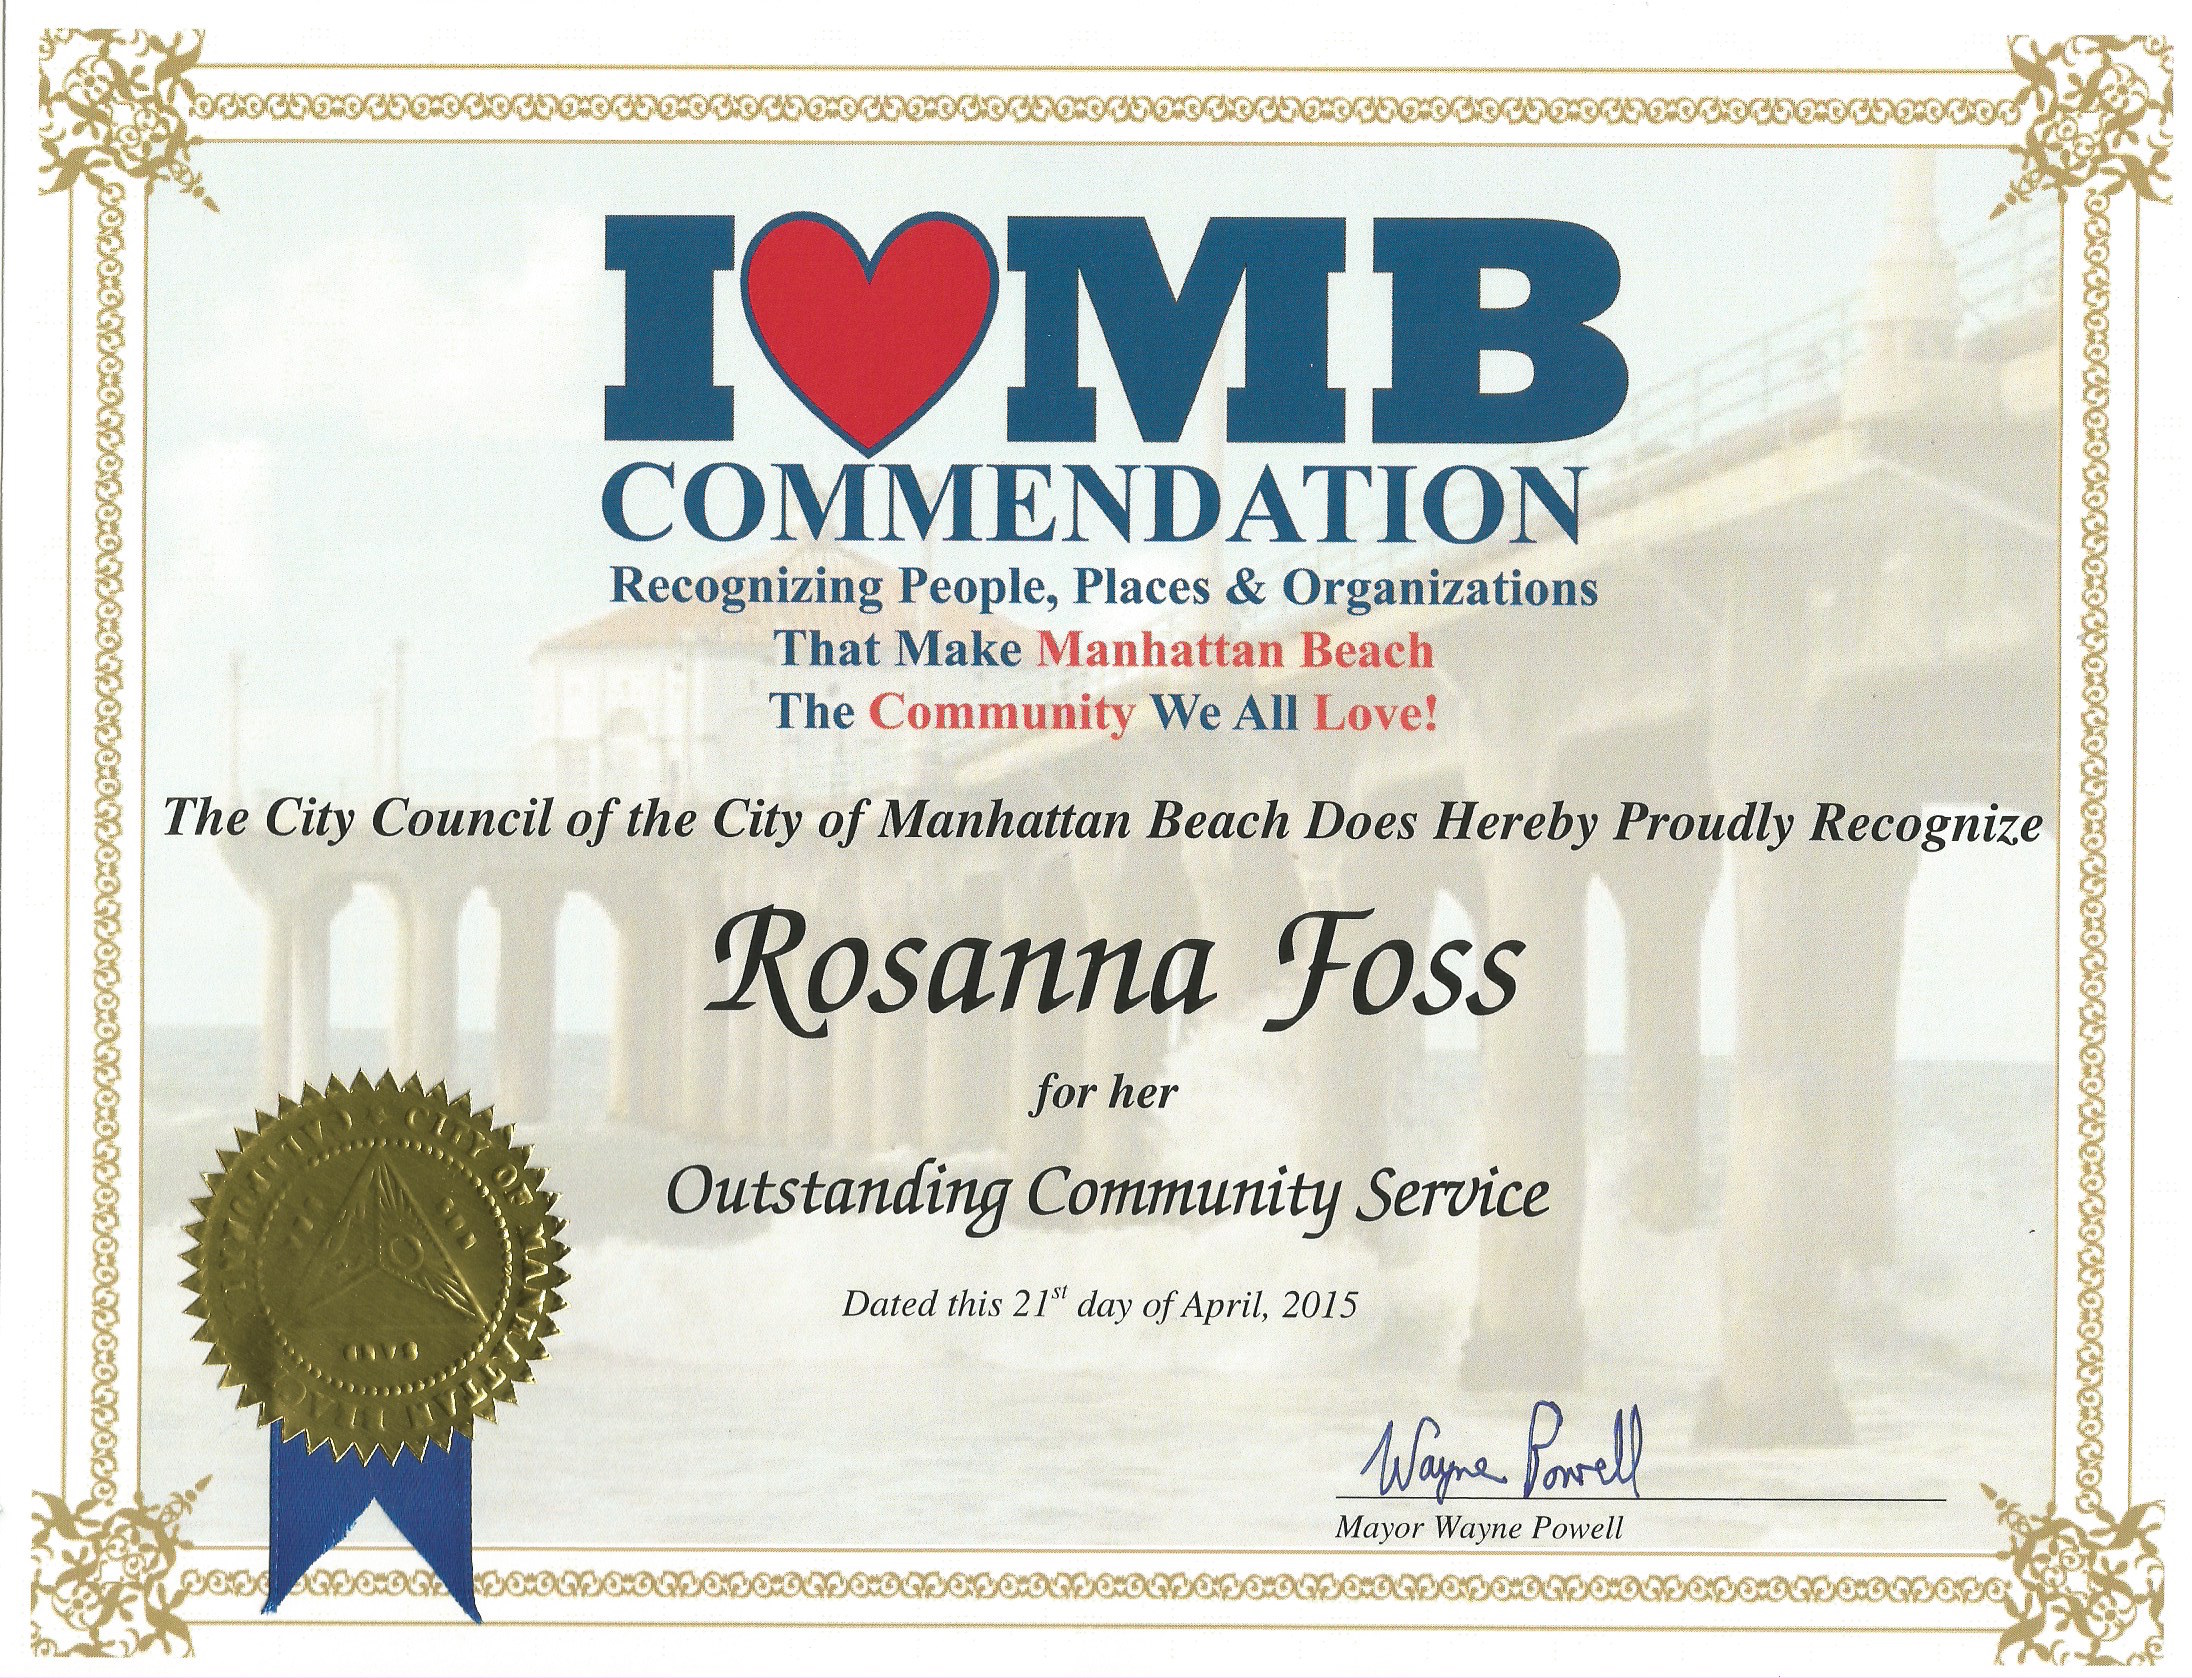 Wayne Powell, Mayor of MB at City Council Meeting presented Rosanna with I LOVE MB COMMENDATION AWARD for her Outstanding Community Service. Rosanna is the youngest recipient in MB History to receive this Award. Rosanna was EXTREMELY excited